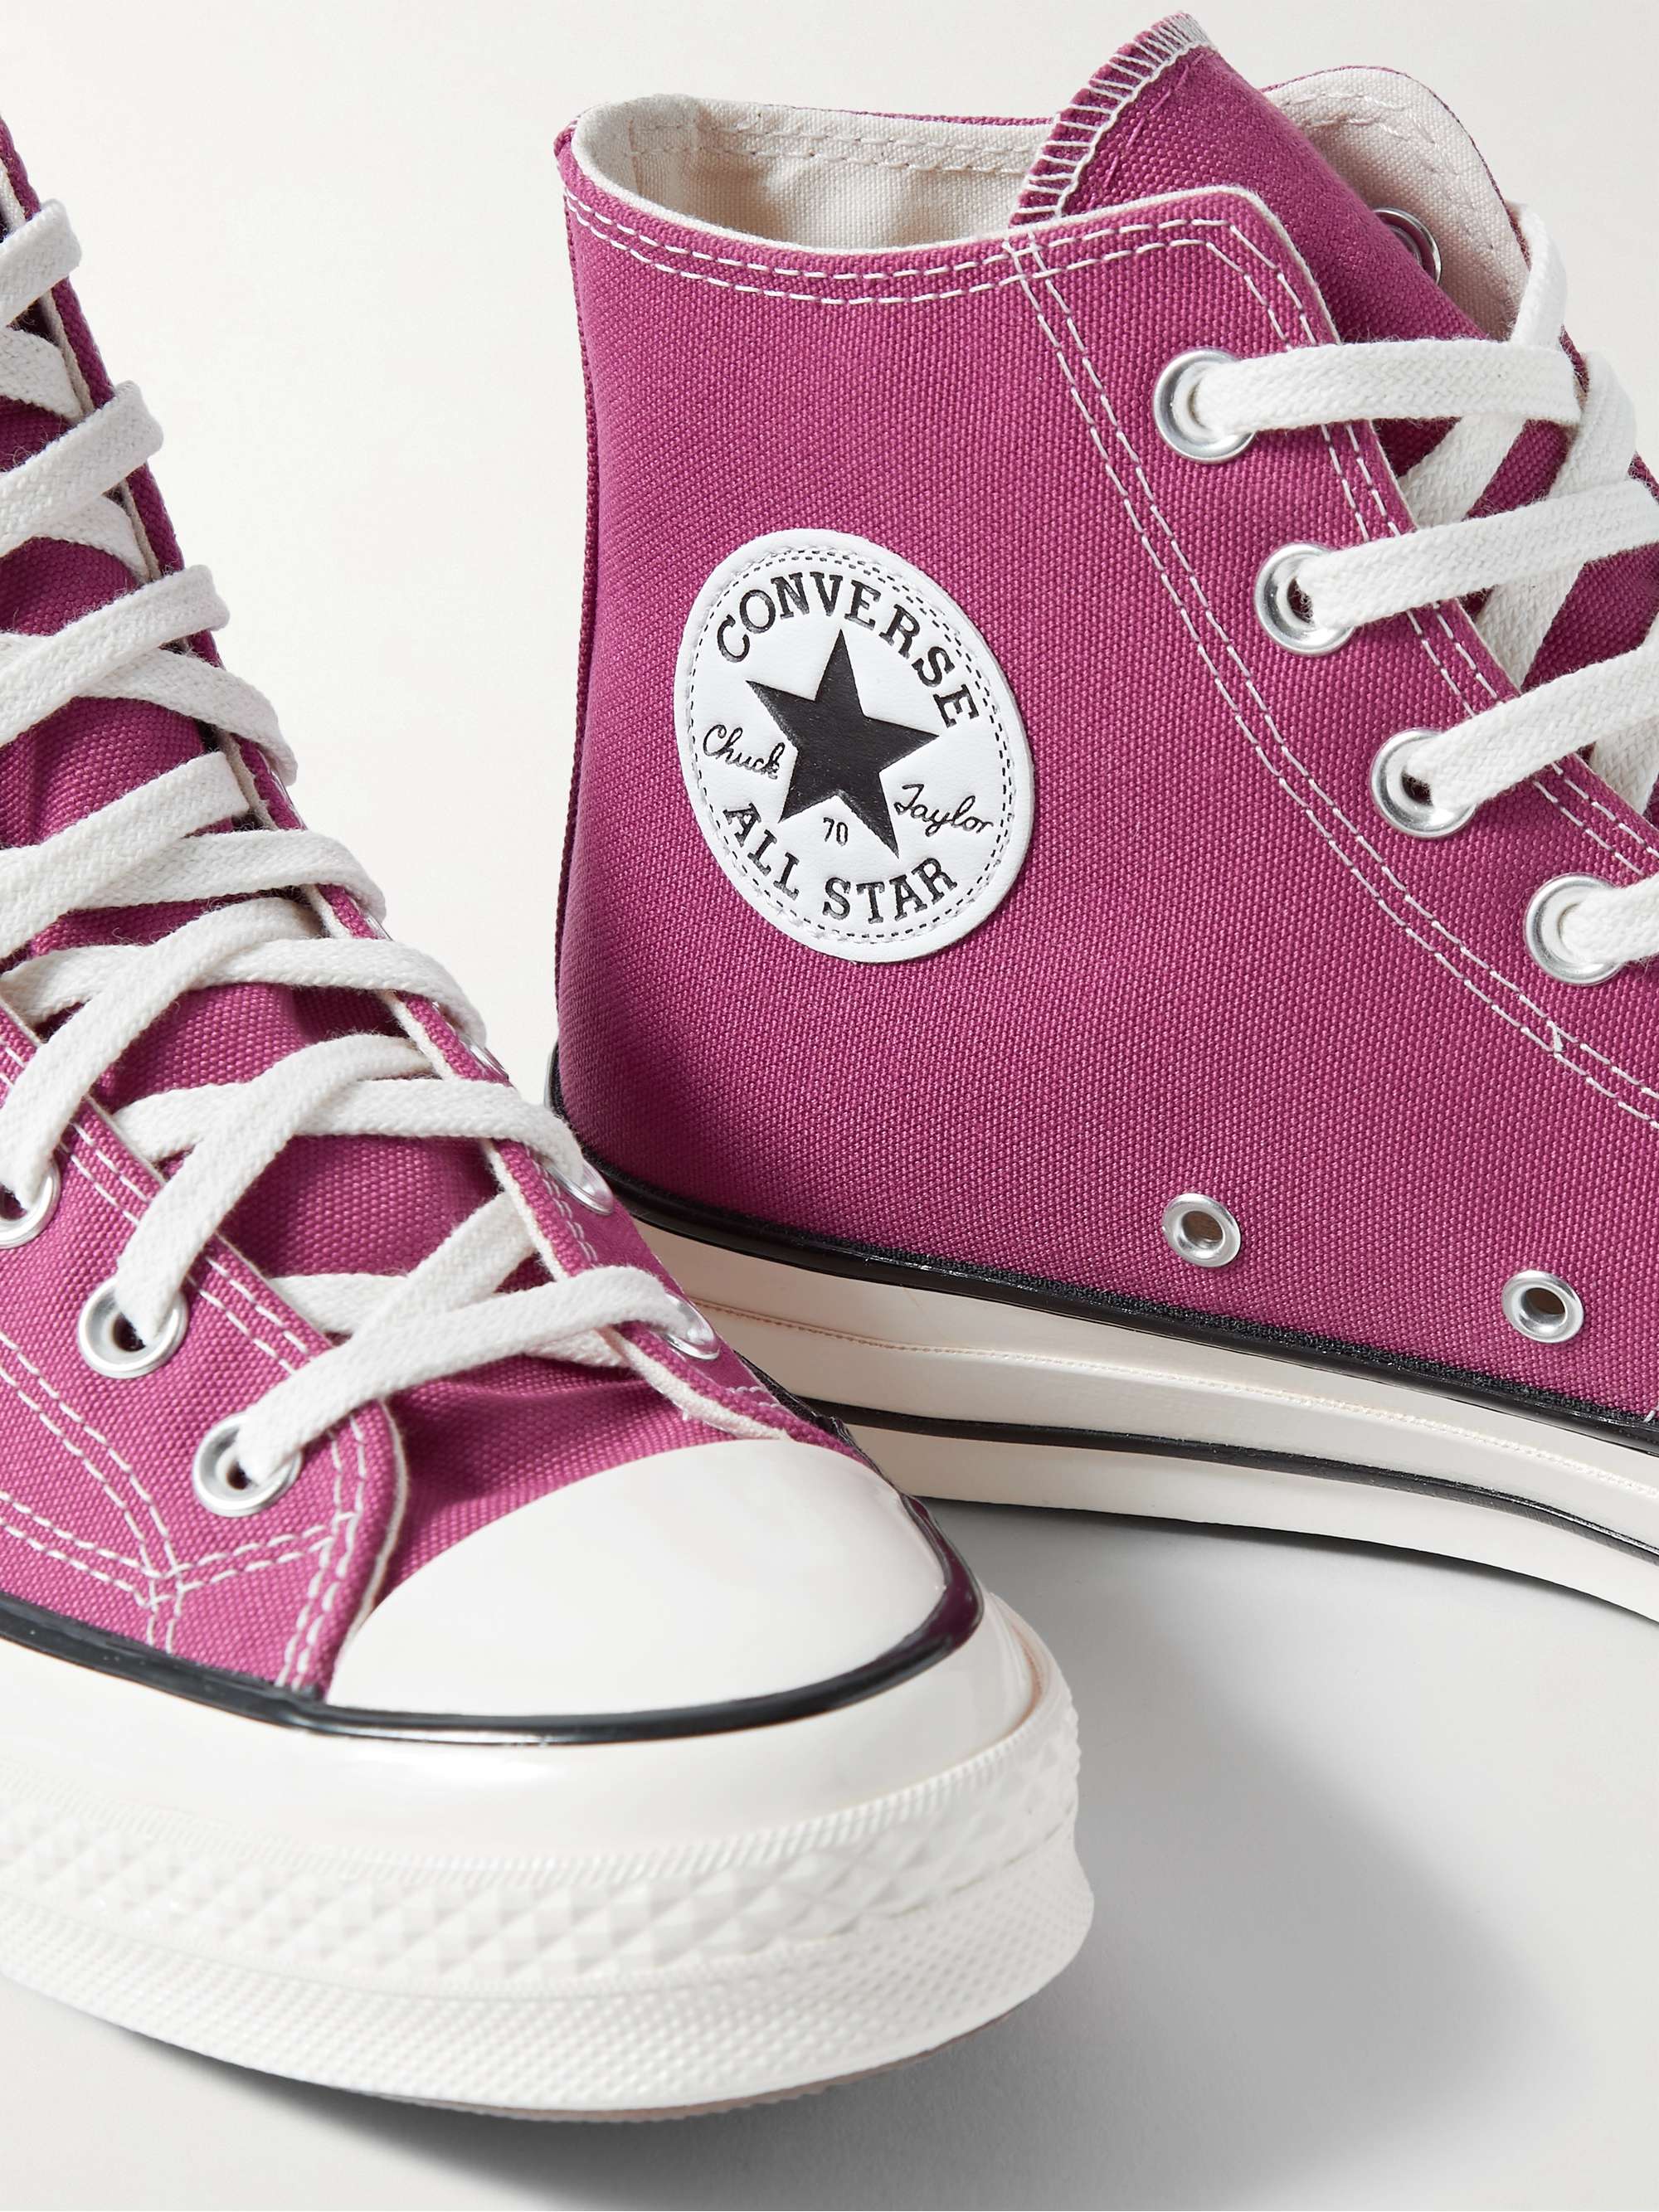 CONVERSE Chuck 70 Recycled Canvas High-Top Sneakers